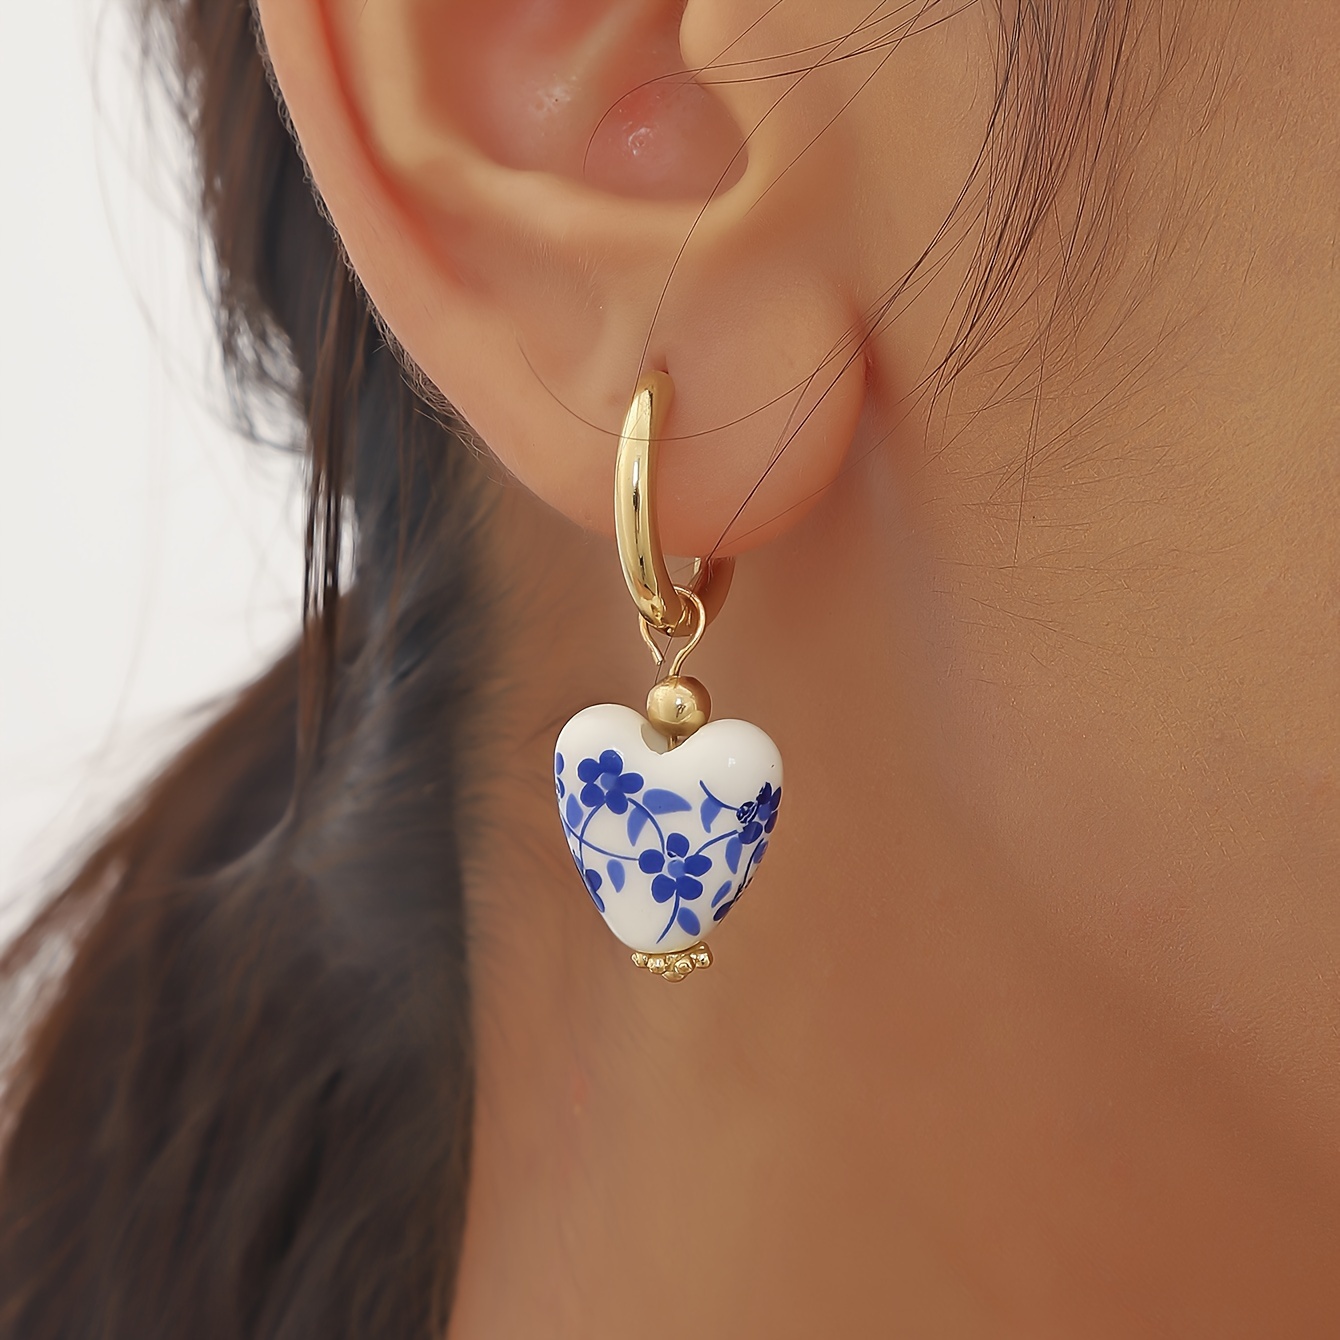 

Retro Chinese Style Ceramic Blue & White Porcelain Heart Dangle Earrings, 1 Pair Ethnic Floral Print Dangle Earrings With Faux Pearls, Fashionable Vintage Hook Ear-wear